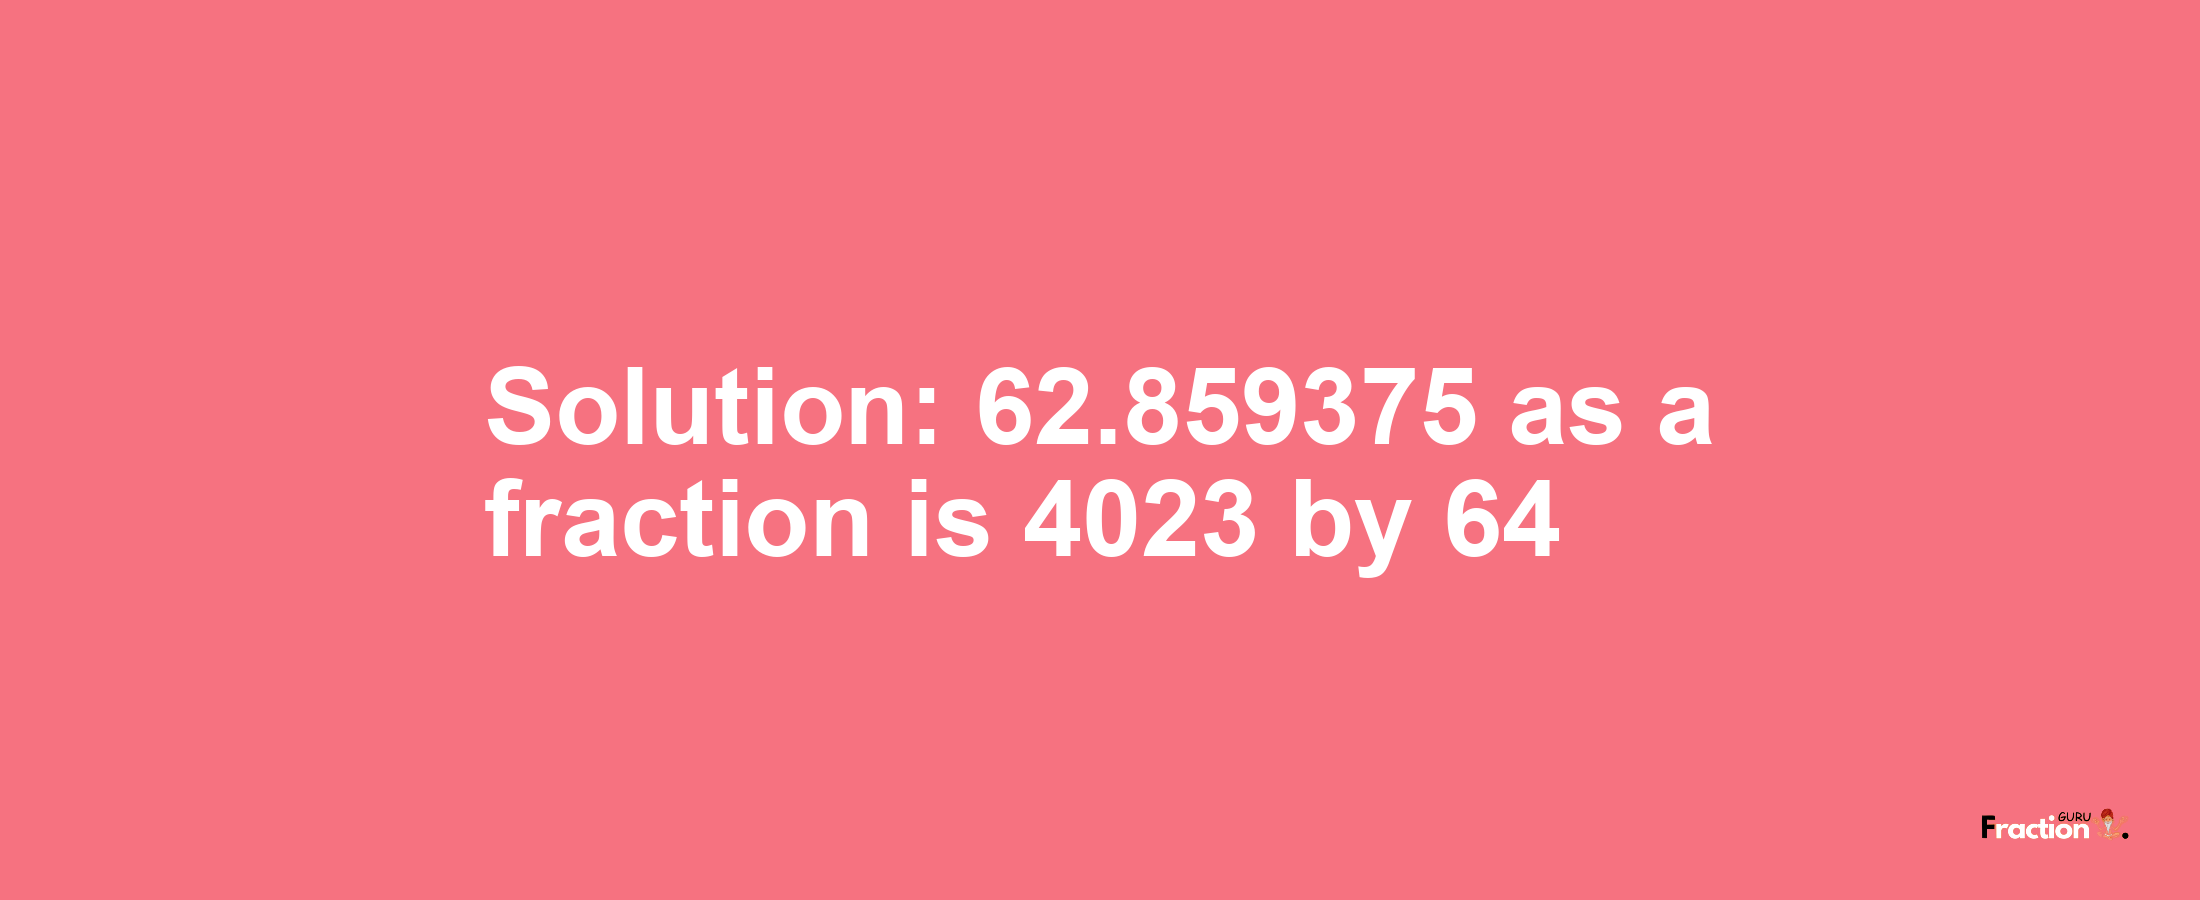 Solution:62.859375 as a fraction is 4023/64